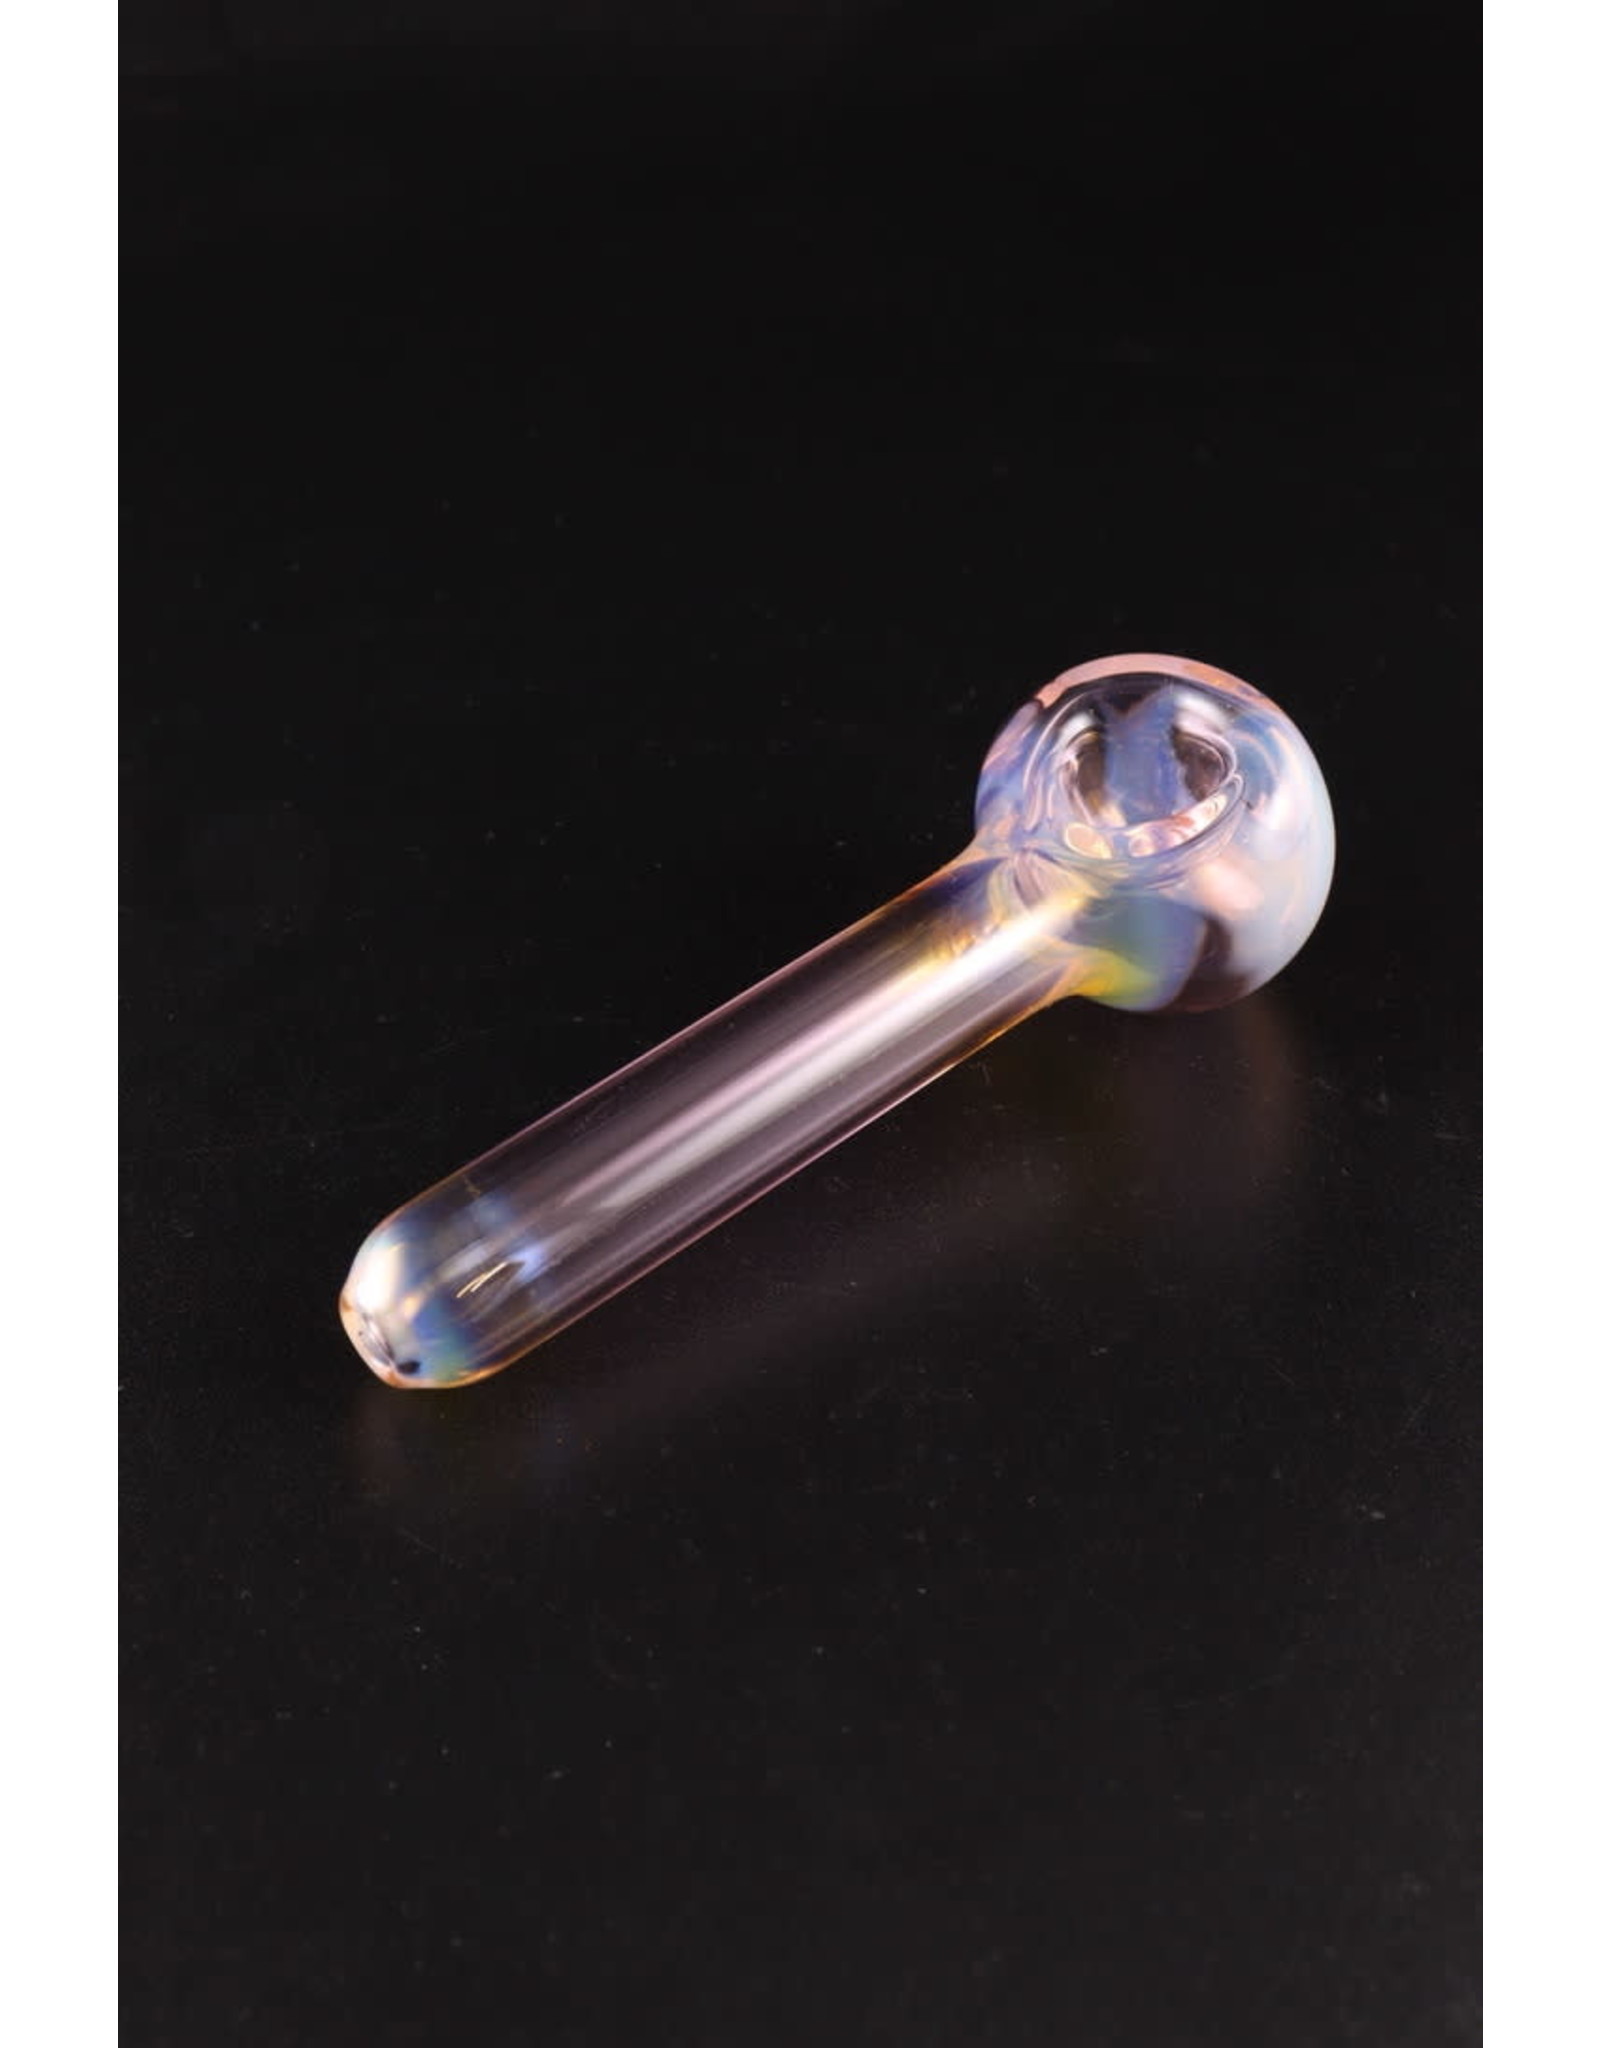 Lil Ben $25 Hand Pipe